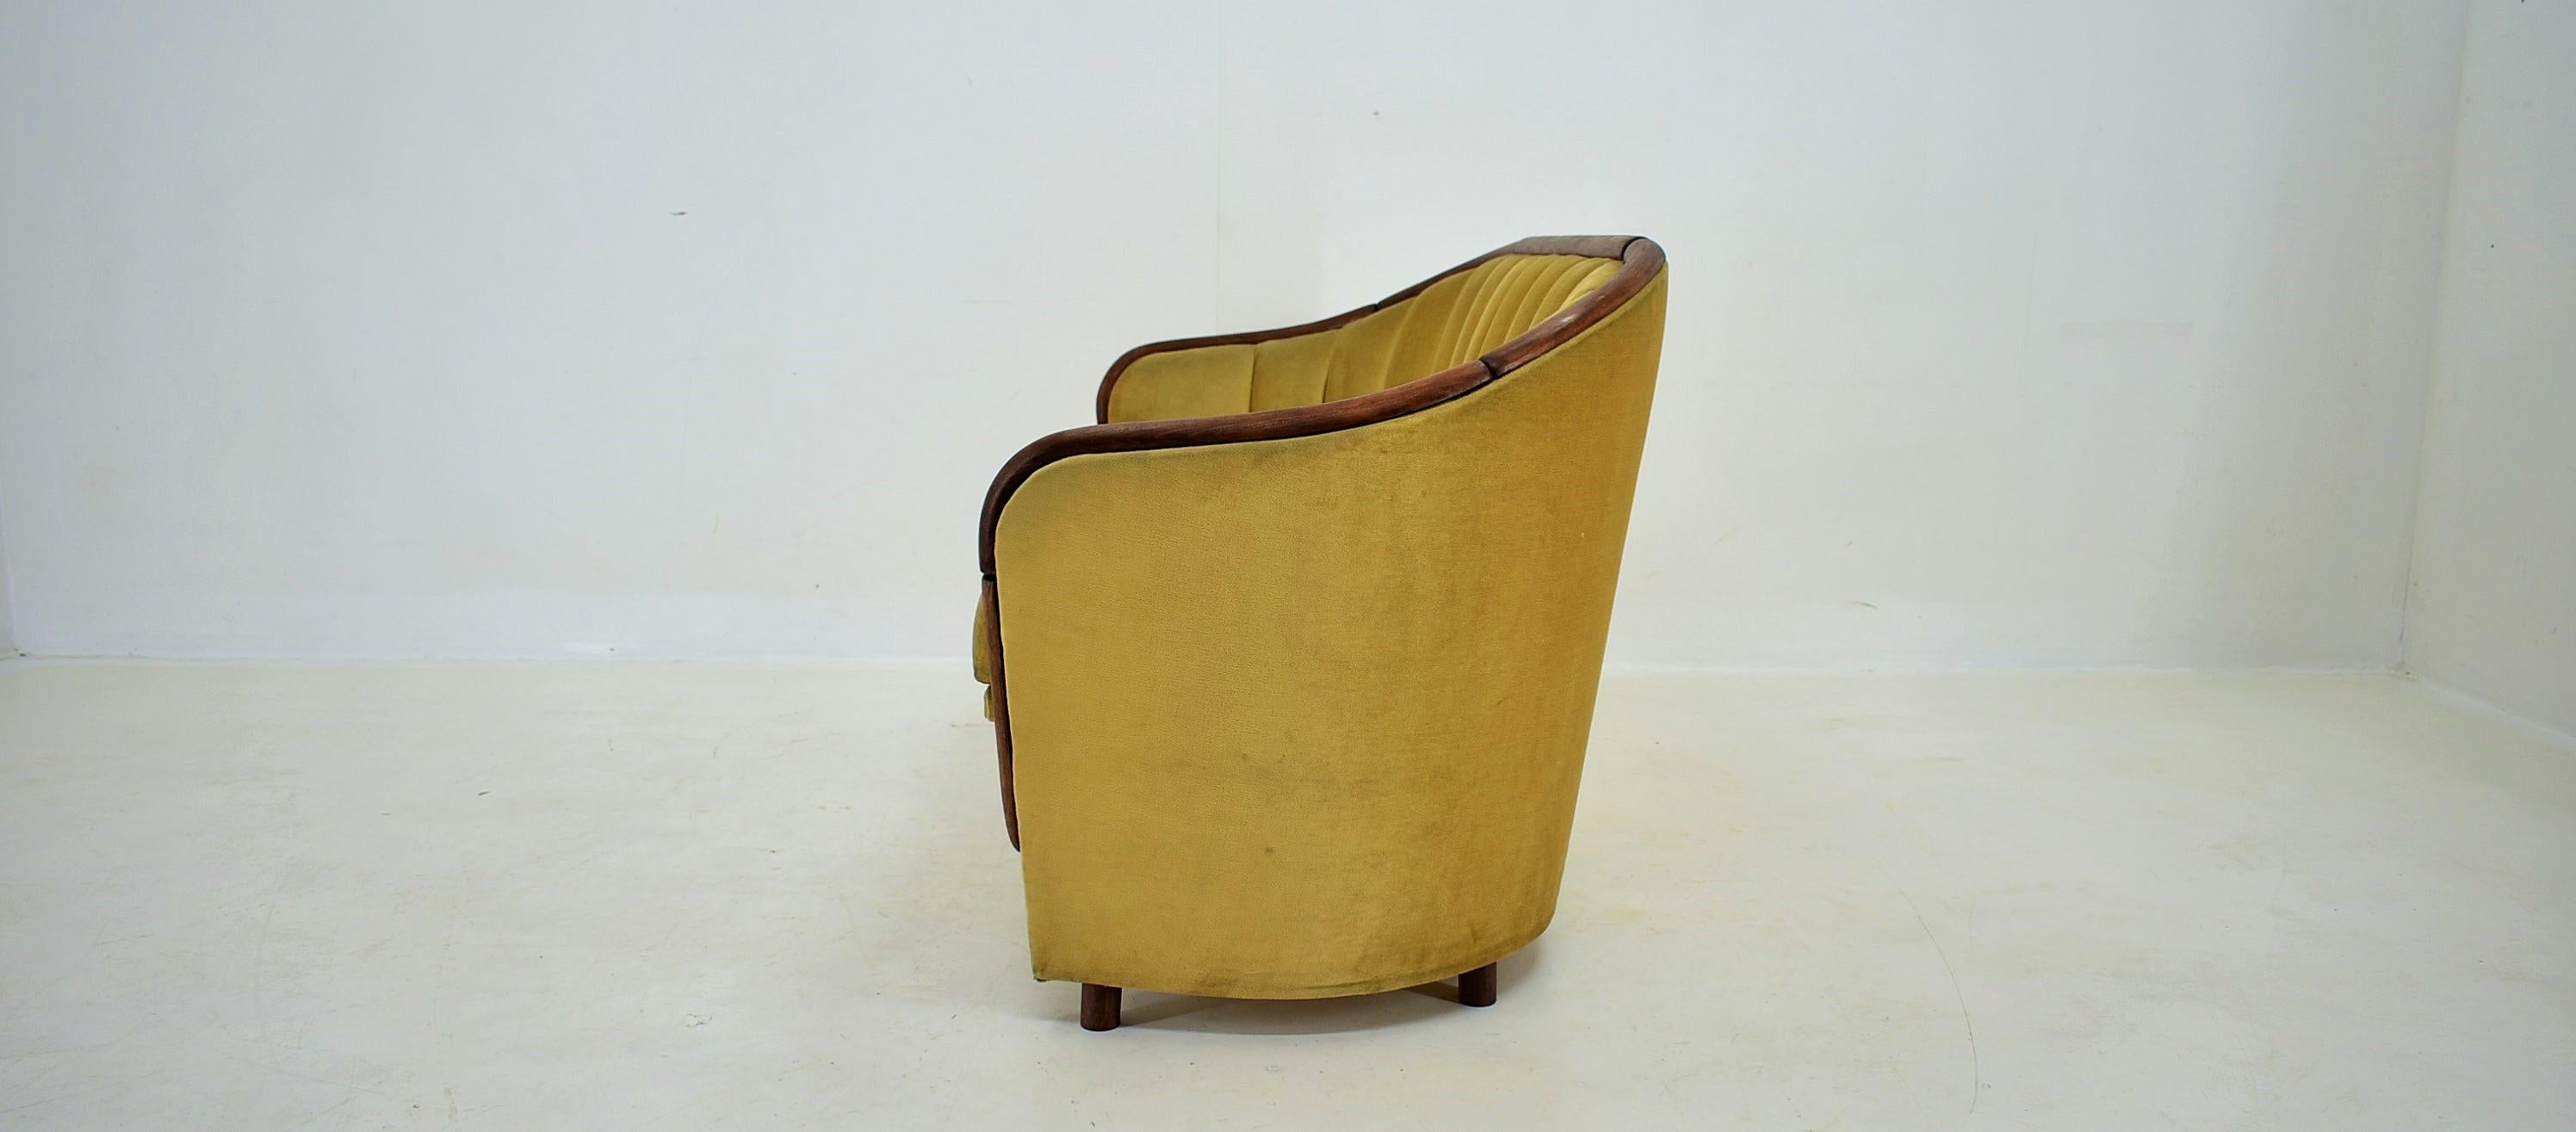 Italian 2-Seat Sofa in the Style of Gio Ponti, 1950s For Sale 3